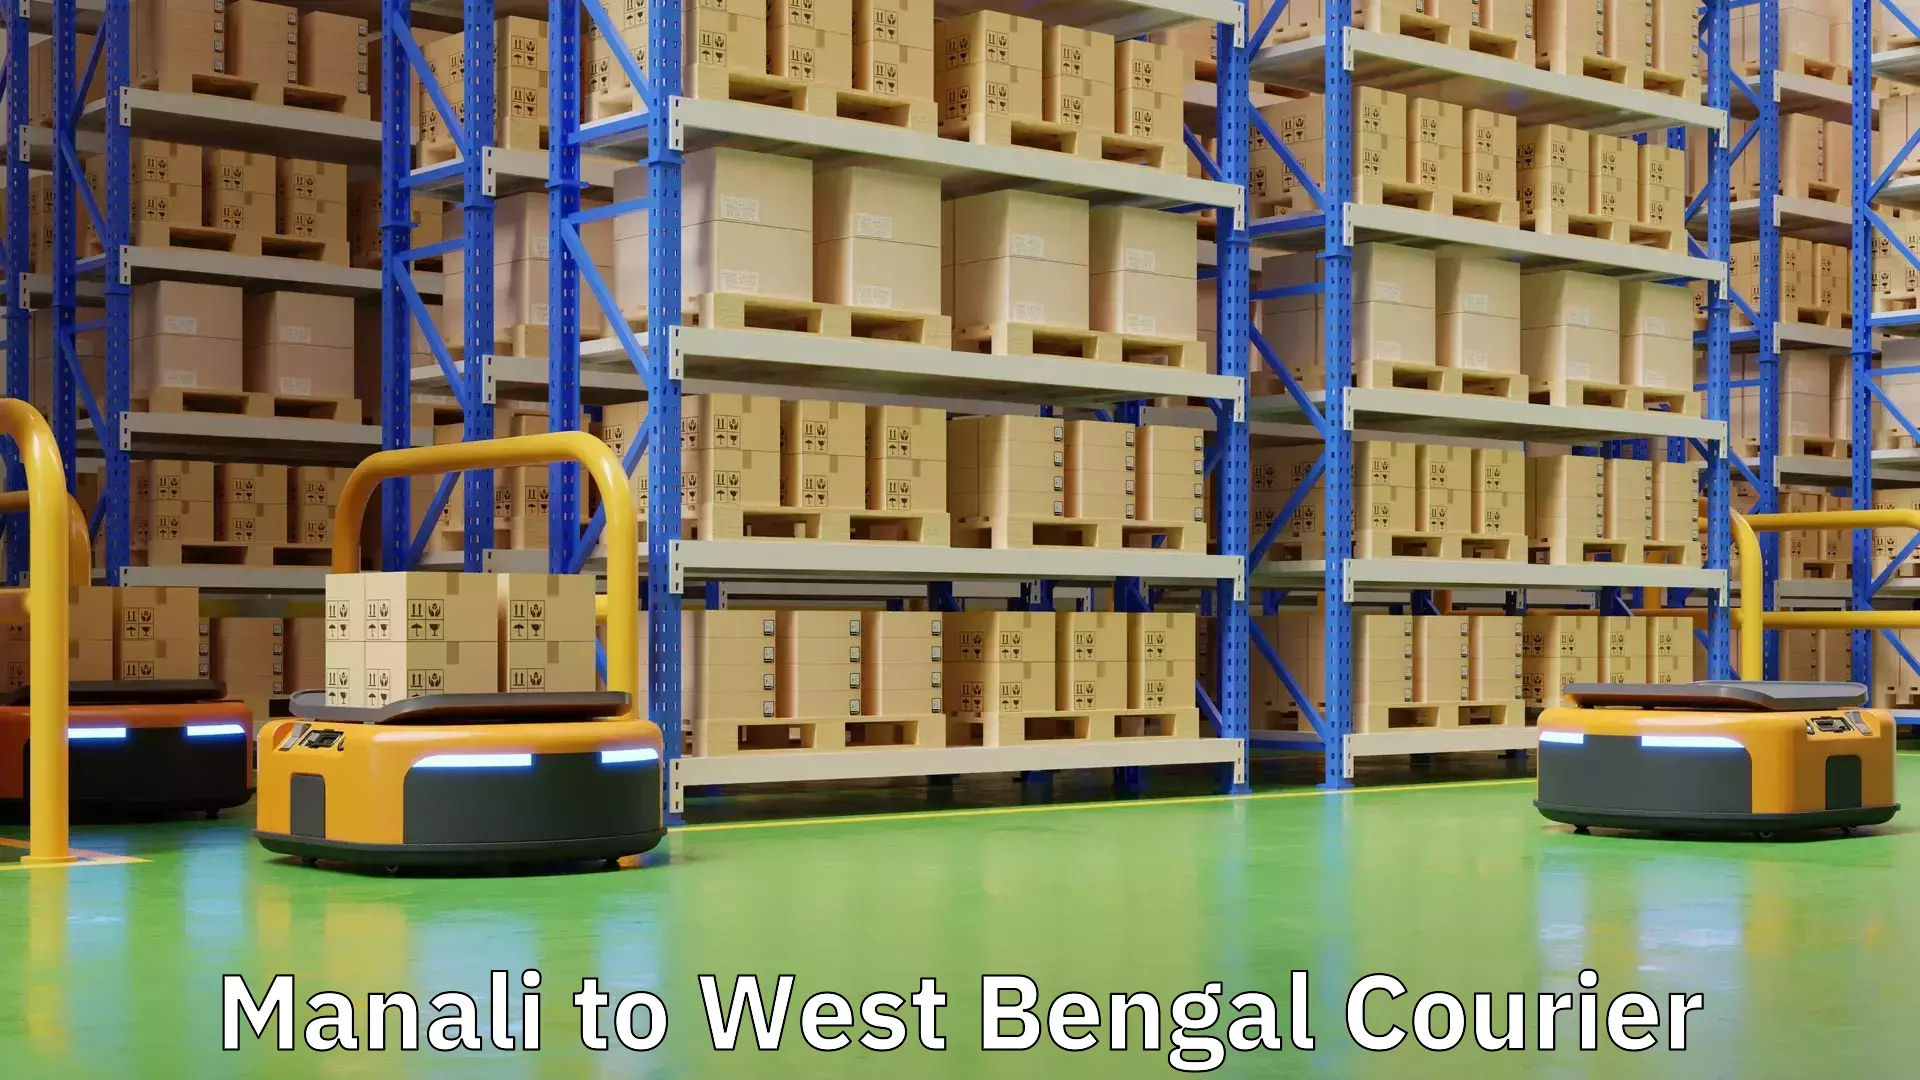 Smart shipping technology Manali to West Bengal